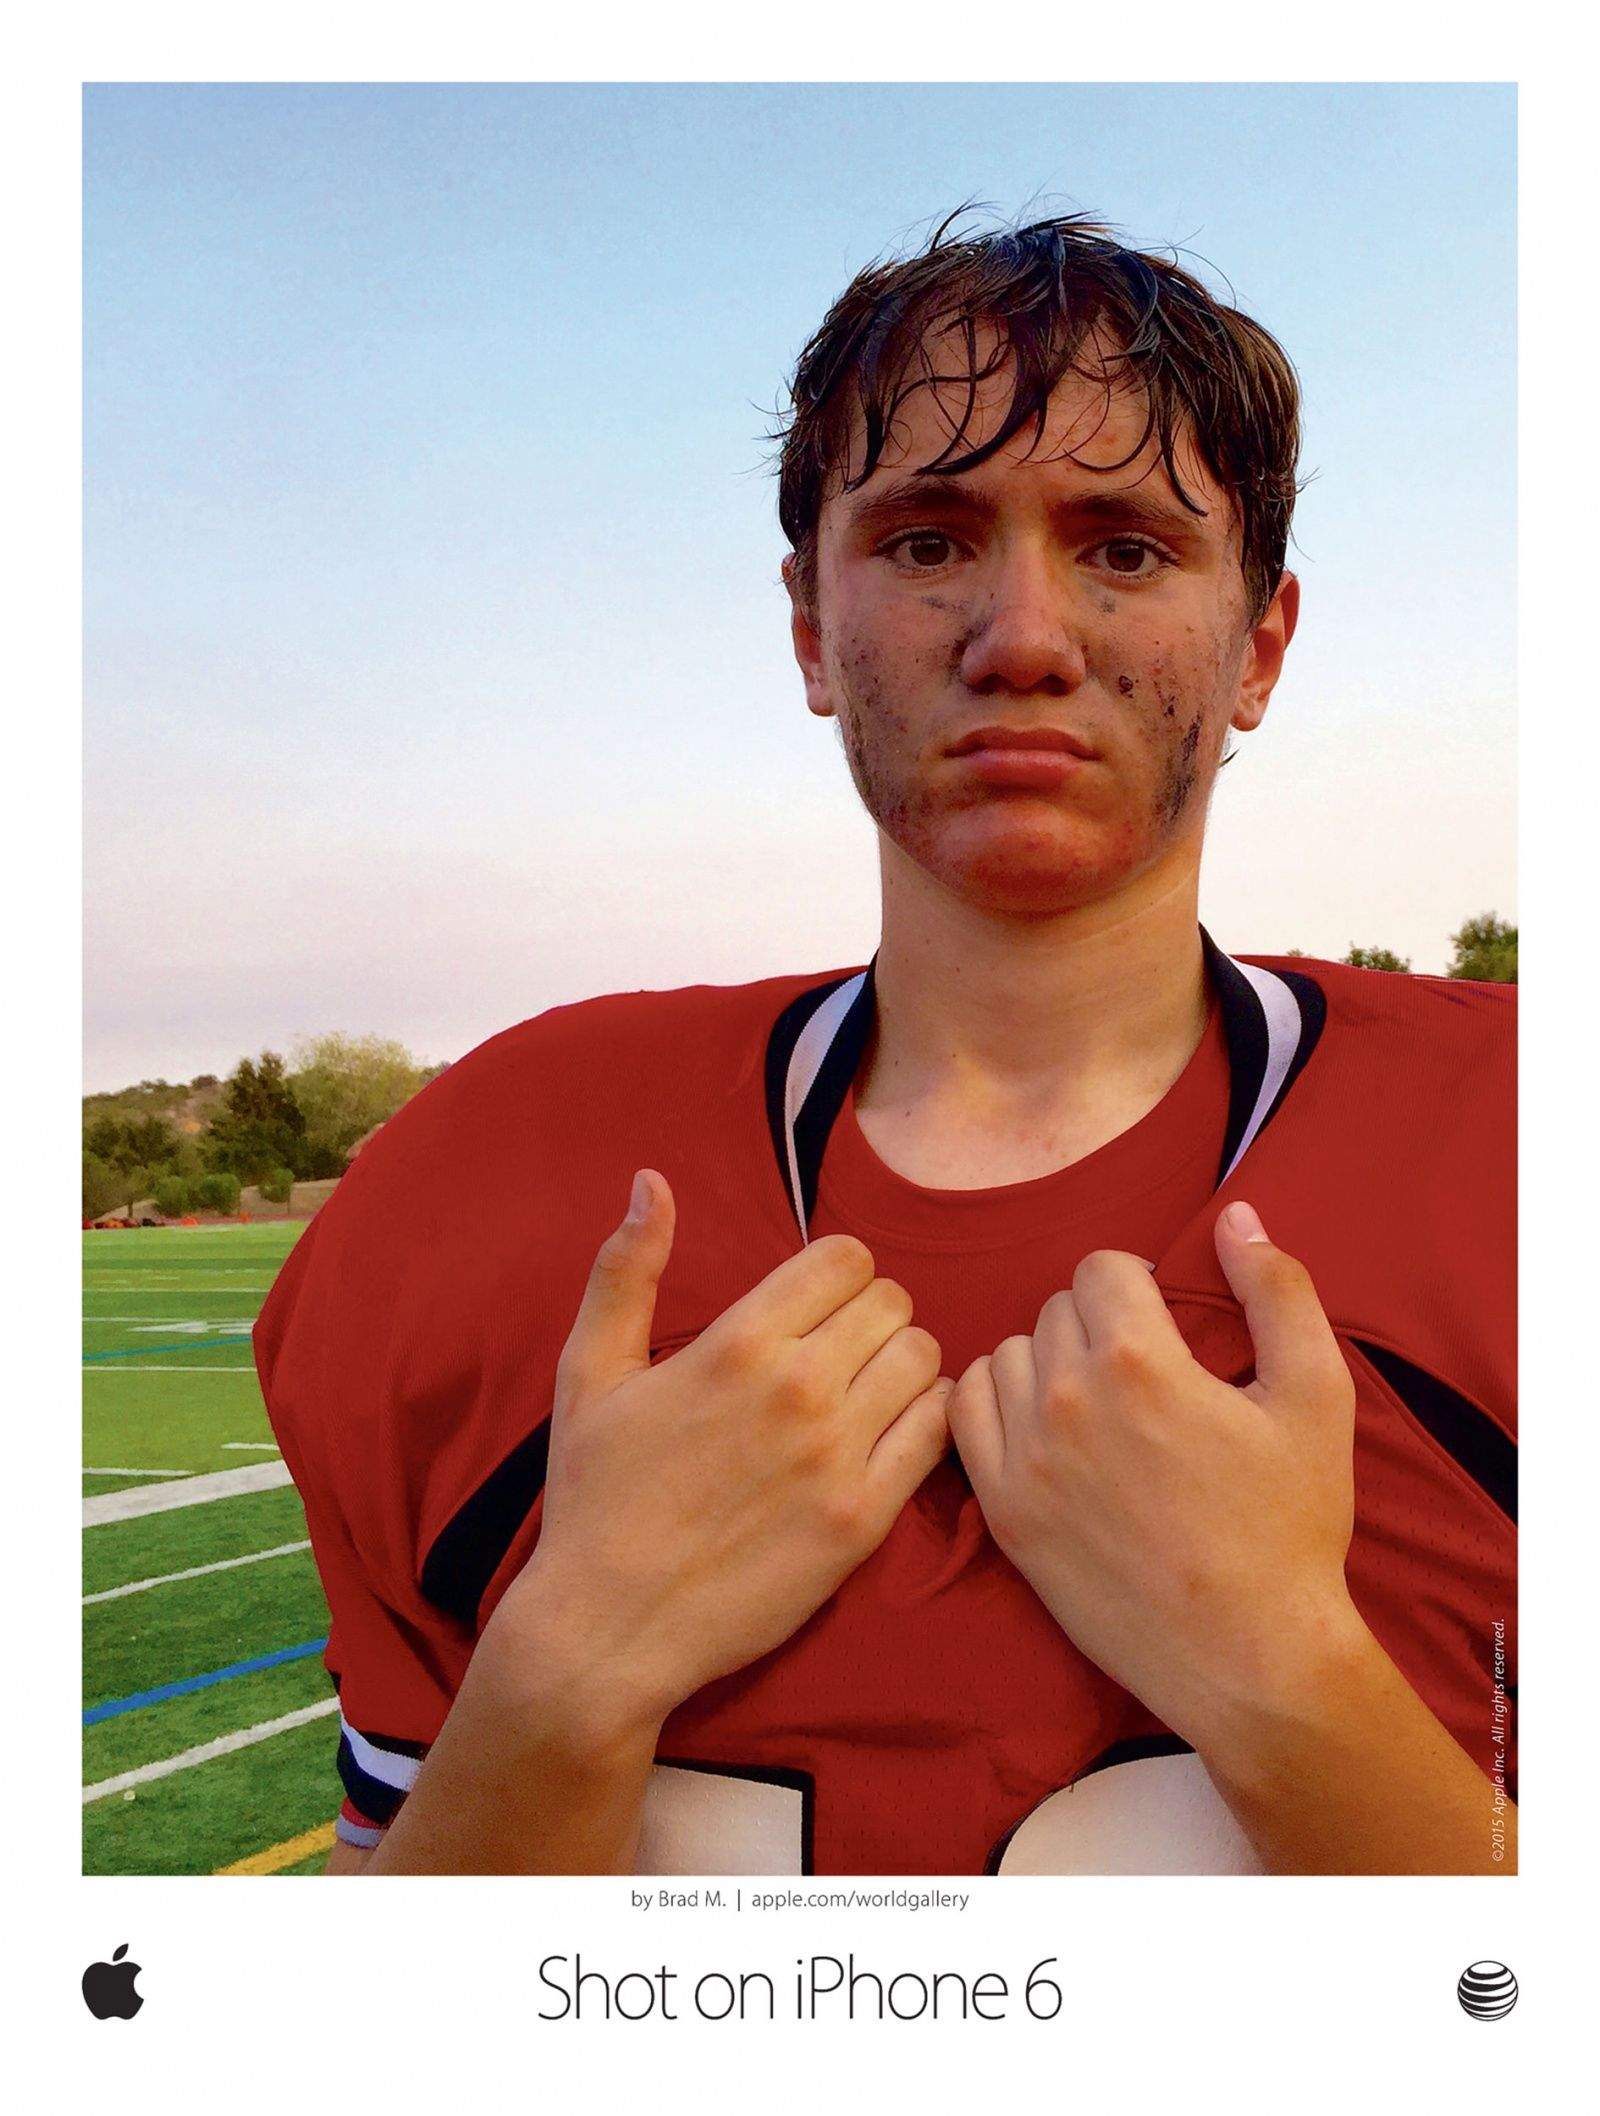 Brad Mangin's portrait of a high school football player was selected for Apple's 